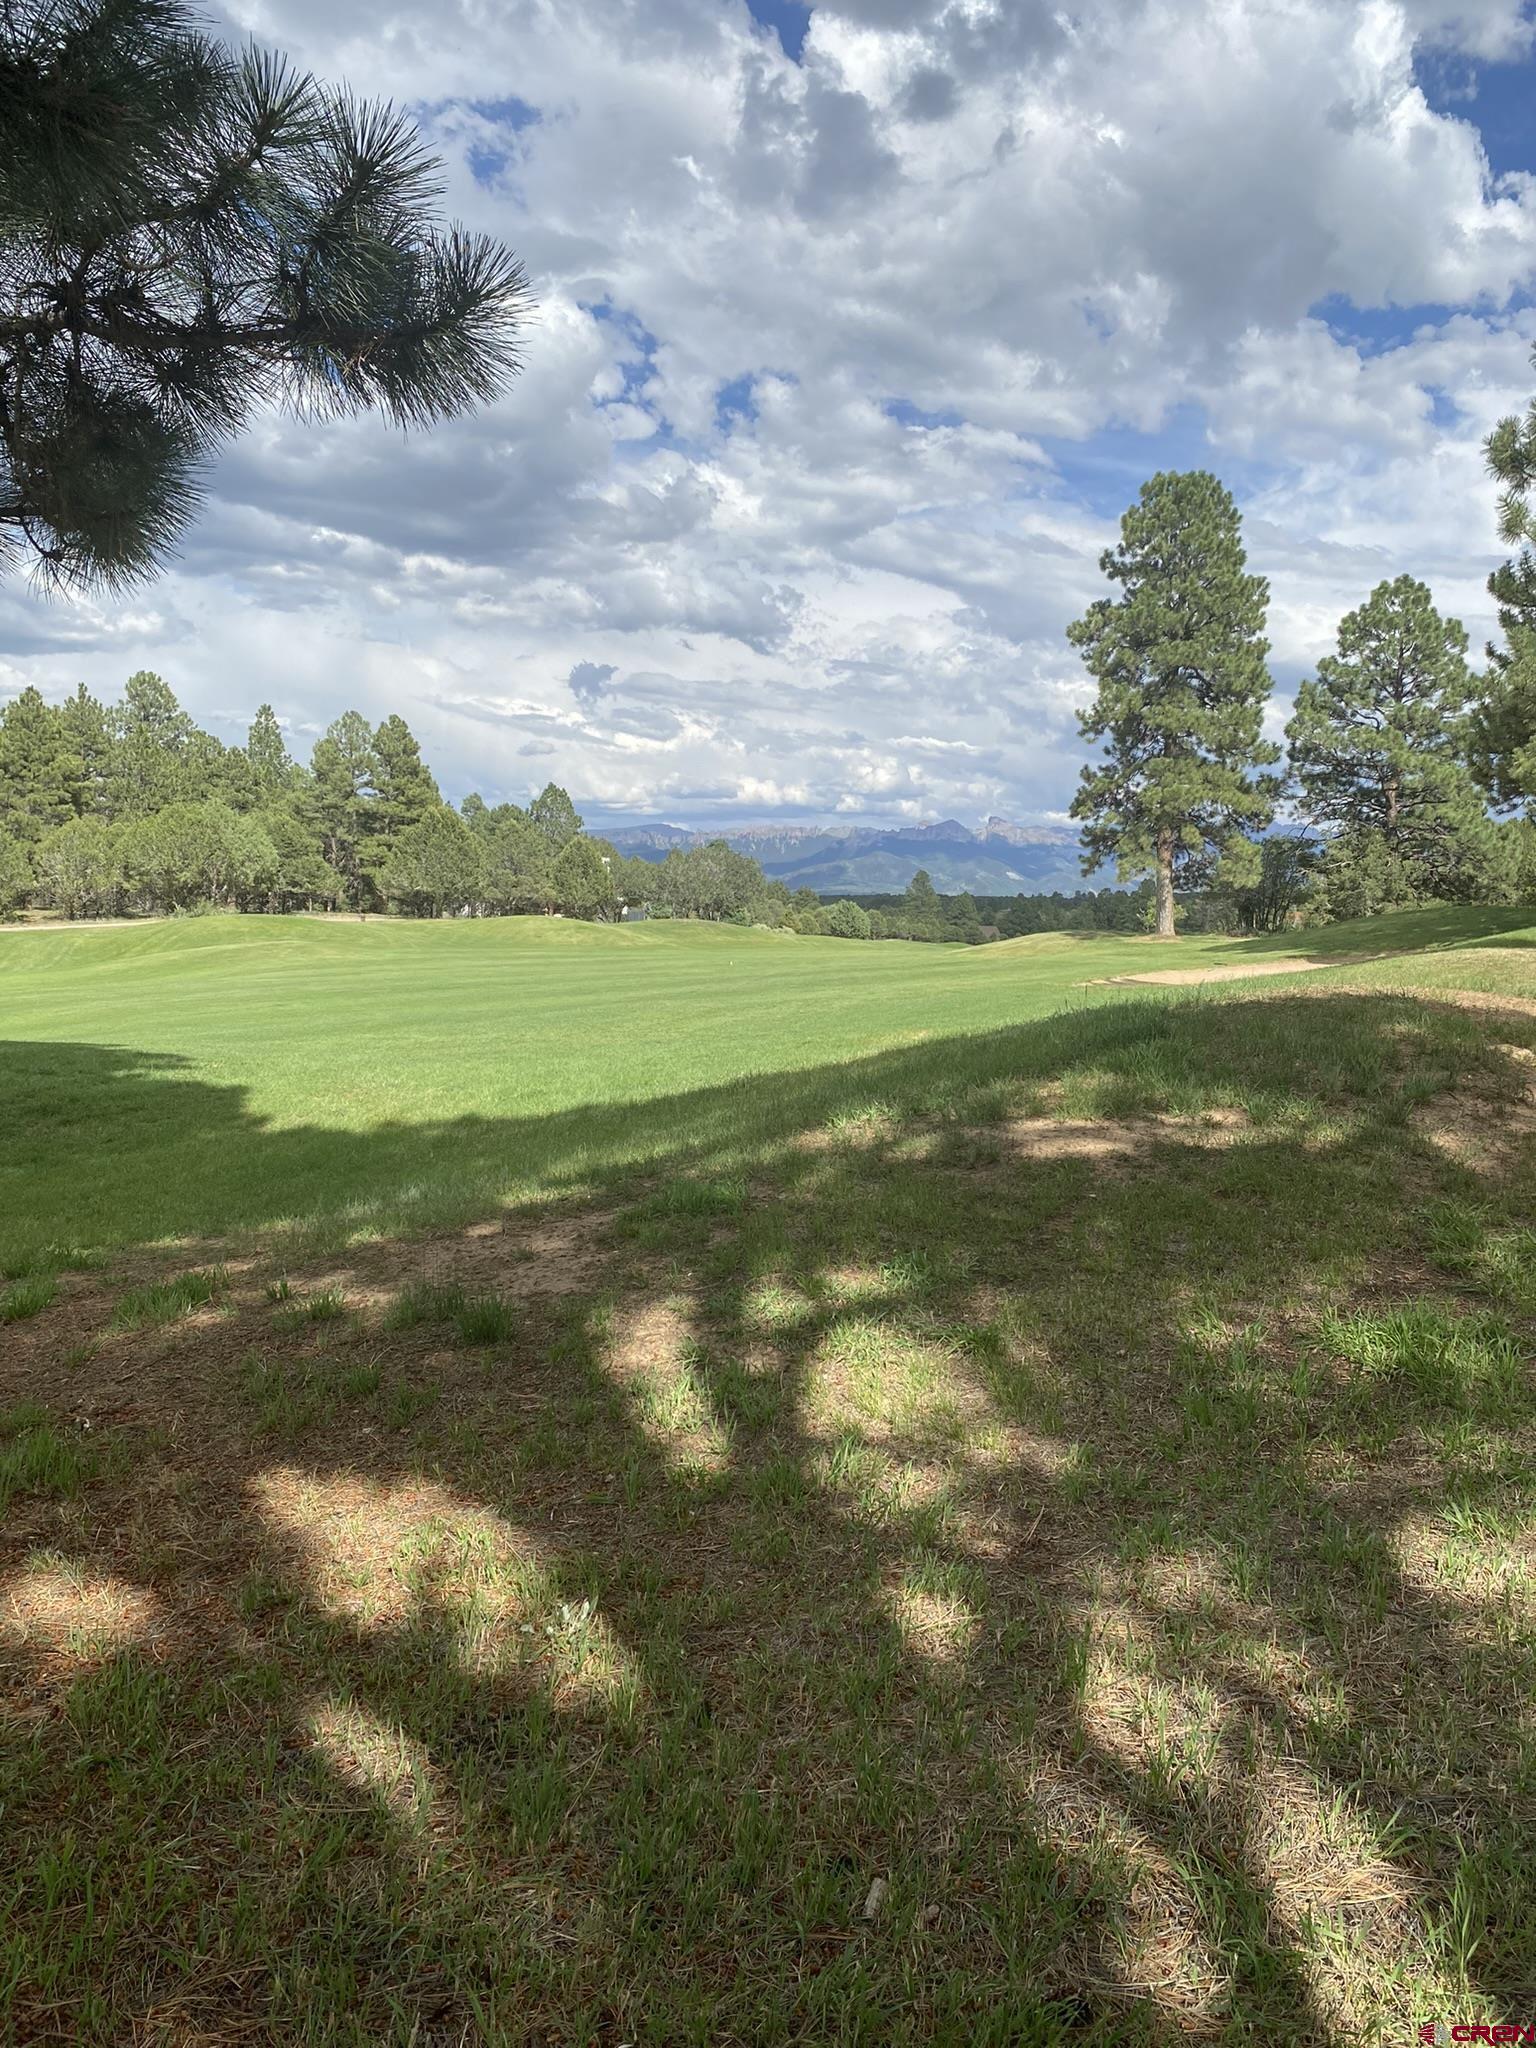 Paved roads and jaw-dropping scenery will lead you to your future homesite with all utilities to the lot line including Fiber Optics.   This corner lot  is 1.16 acres with tall Ponderosa's and views of the Cimarrons and Golf Course from the back of the lot.  A carefully designed home has the possibility or Mountain Views.  Divide Ranch & Club Golf Course is the perfect spot to get your game on.  Even for those that are not avid golfers there is different scenery from every hole on the course that you do not want to miss out on. In the winter enjoy snowshoeing, cross country skiing and sledding throughout the community.  The clubhouse offers opportunities to meet with your neighbors for a cocktail and a bite to eat.   It is also a gorgeous backdrop for a special events including weddings, birthdays, or other small private parties.  The community is centrally located in Southwestern Colorado within close proximity to every outdoor activity you can imagine.  Enjoy skiing or snowboarding in world renowned Telluride CO in the winter and take advantage of the many festivals offered throughout the summer including, Film, Wine, Yoga, Blue Grass ,Blue‘s & Brew’s and many more .  Ouray, known as the Little Switzerland of the US,  is within 15 min where you can soak in the Hot Springs while looking up at the mountains and hike or drive to waterfalls. Fly fishing, boating, kayaking, paddle boarding, hiking, mountain biking and off-roading is literally minutes away from your front door.  When you are done playing in the mountains stop by one of the local breweries or dine in one of the restaurants.  Divide Ranch & Club is a hidden gem nestled in the San Juan’s and is the perfect spot for a forever home or a second home.